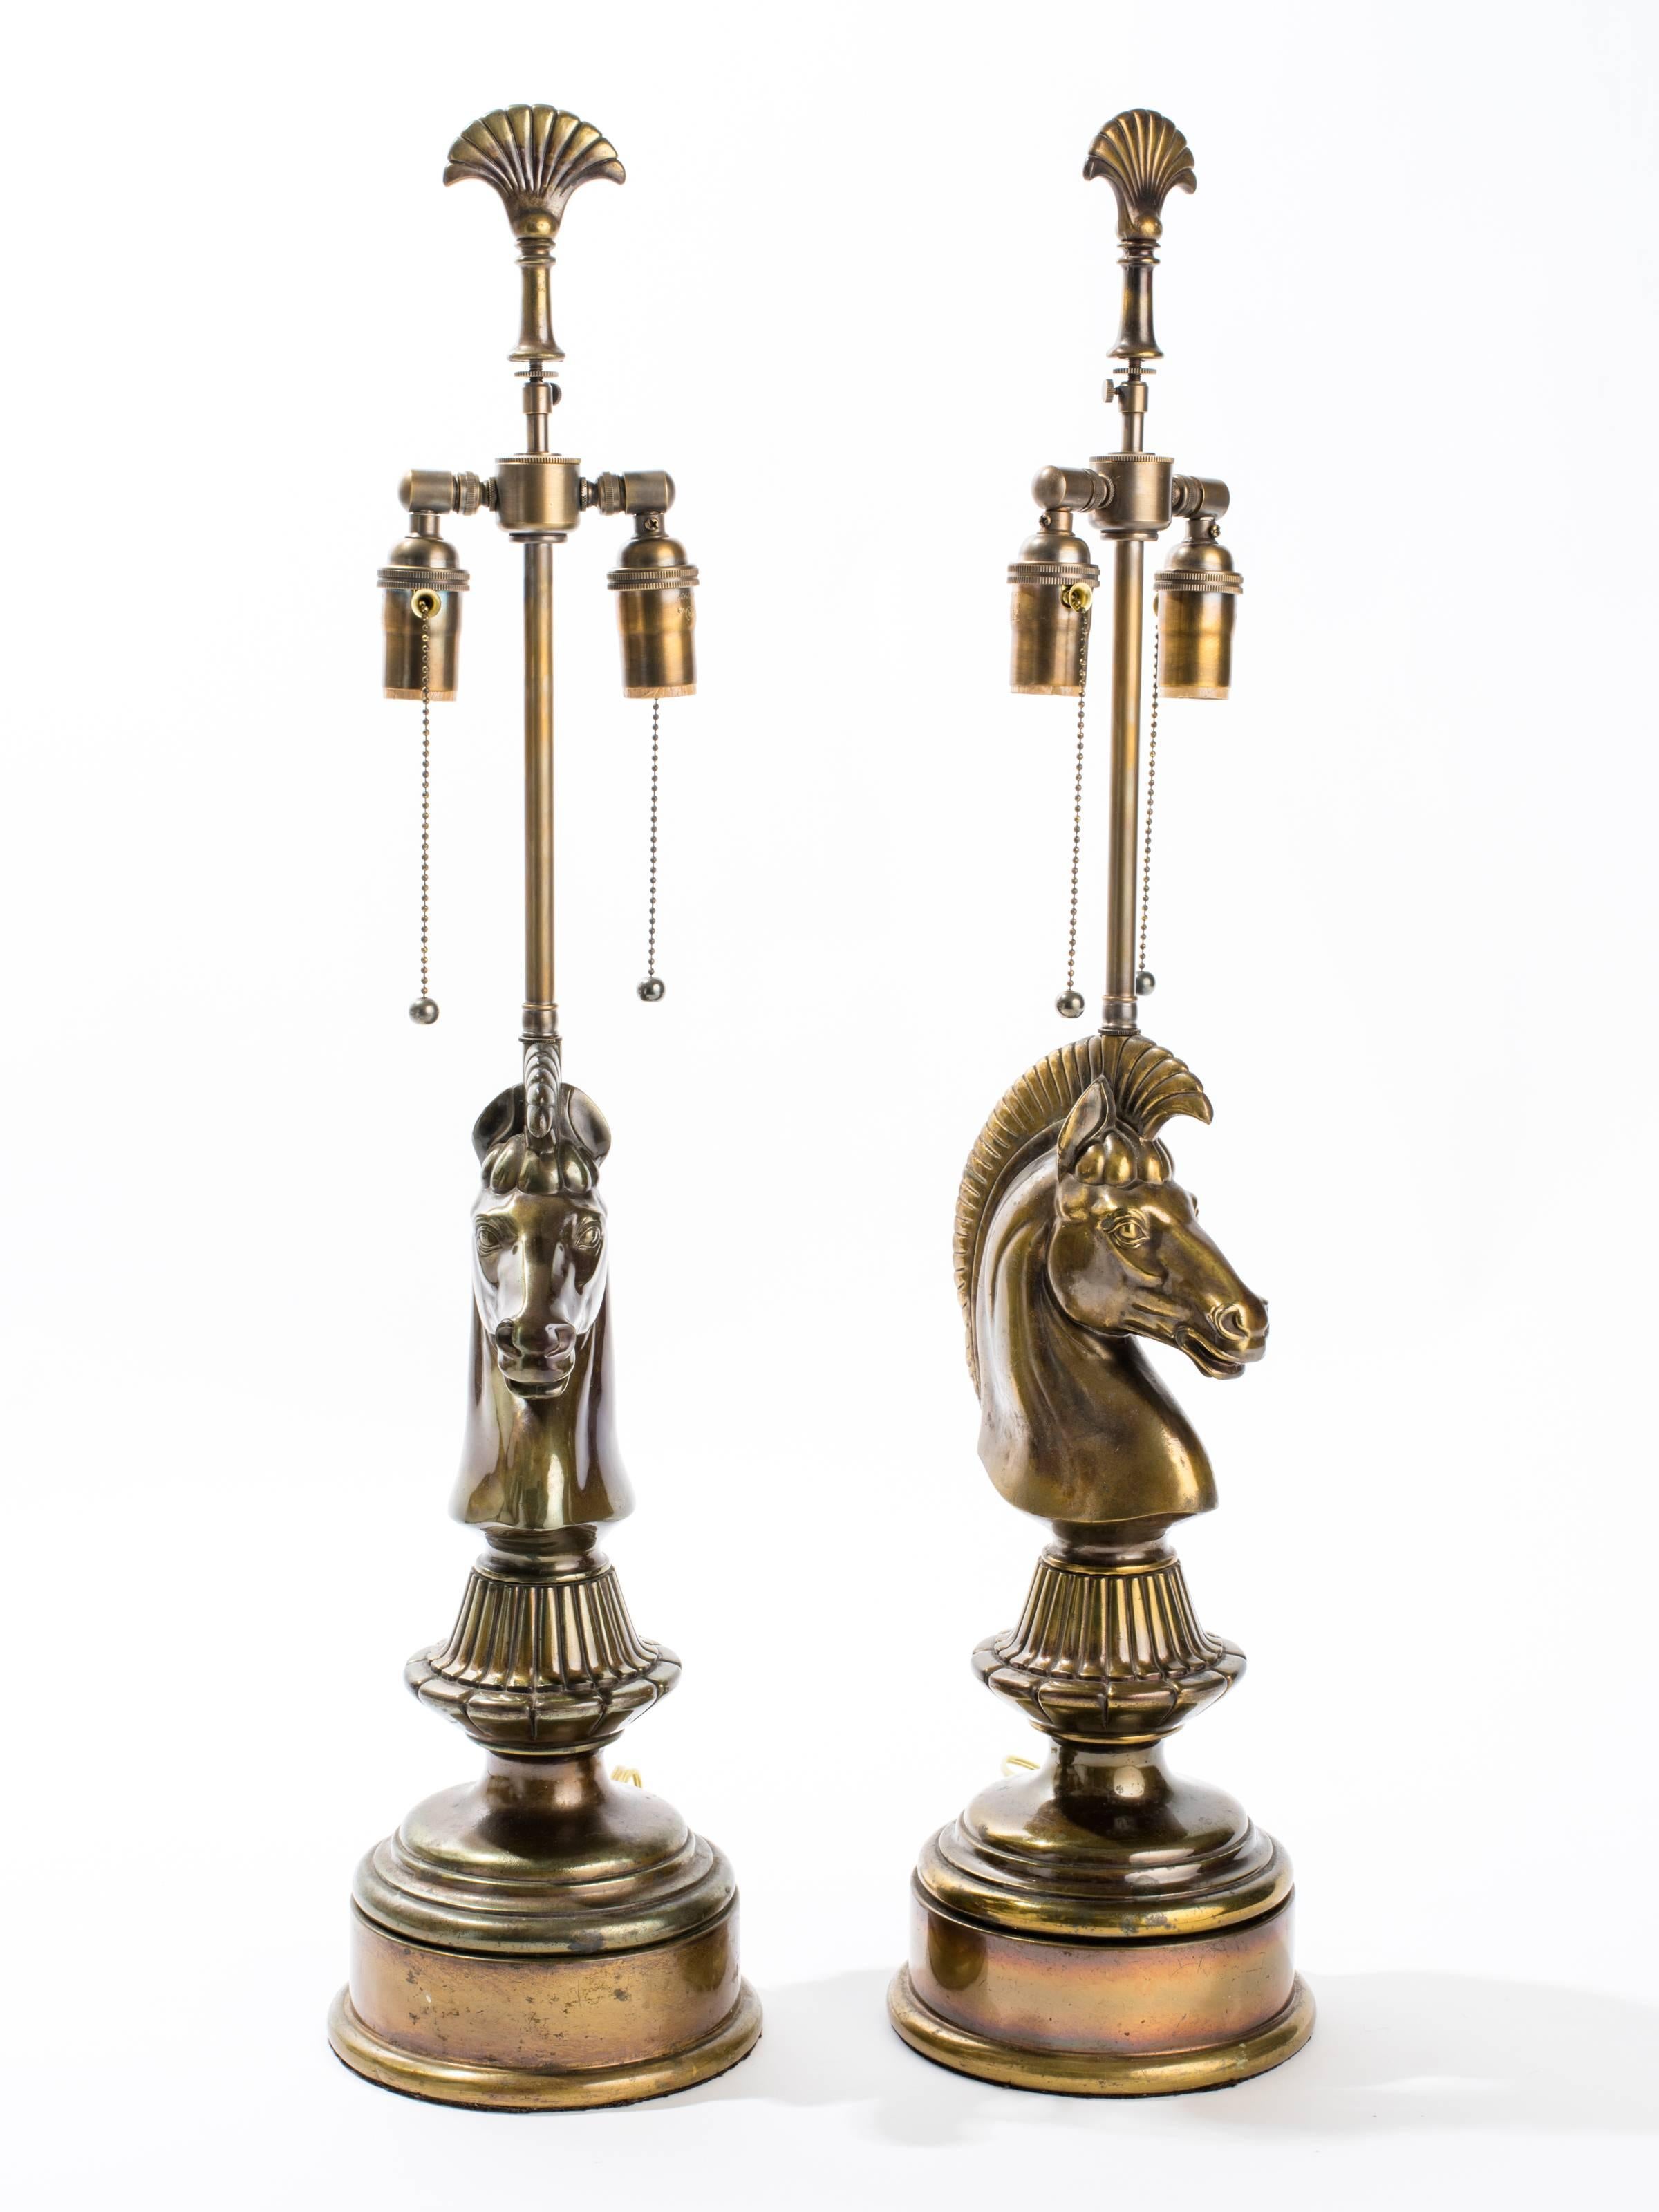 Pair of vintage cast metal horse head lamps with bronze finish.
Rewired with double pull chain sockets.